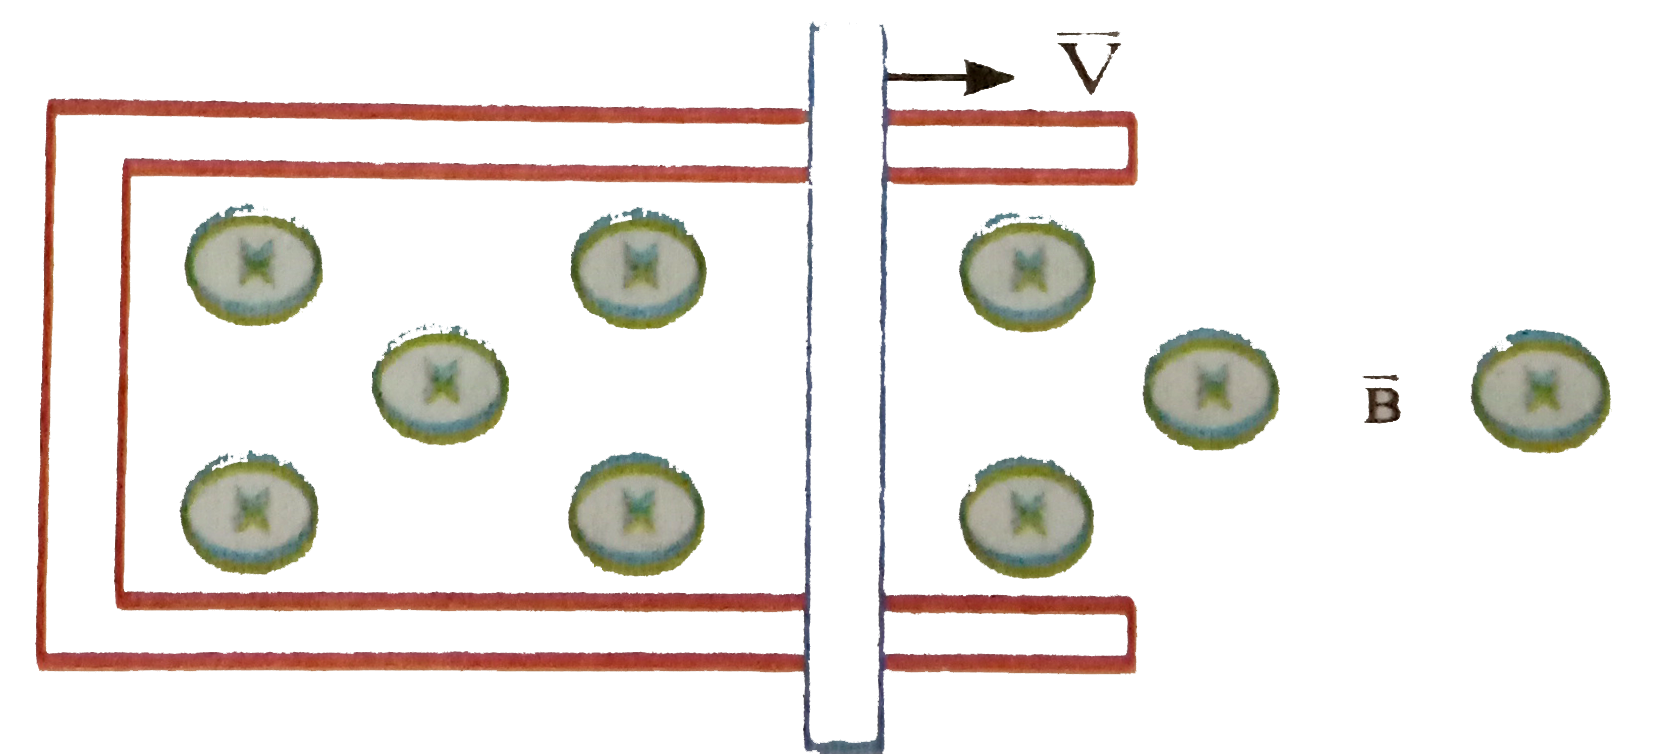 A rod lies acrossfrictionless rails in a uniform magnetic field vec(B) as shown in figure. The rod moves to the right with speed V. In order to make the induced emf in the circuit to be zero, the magnitude of the magnetic field should